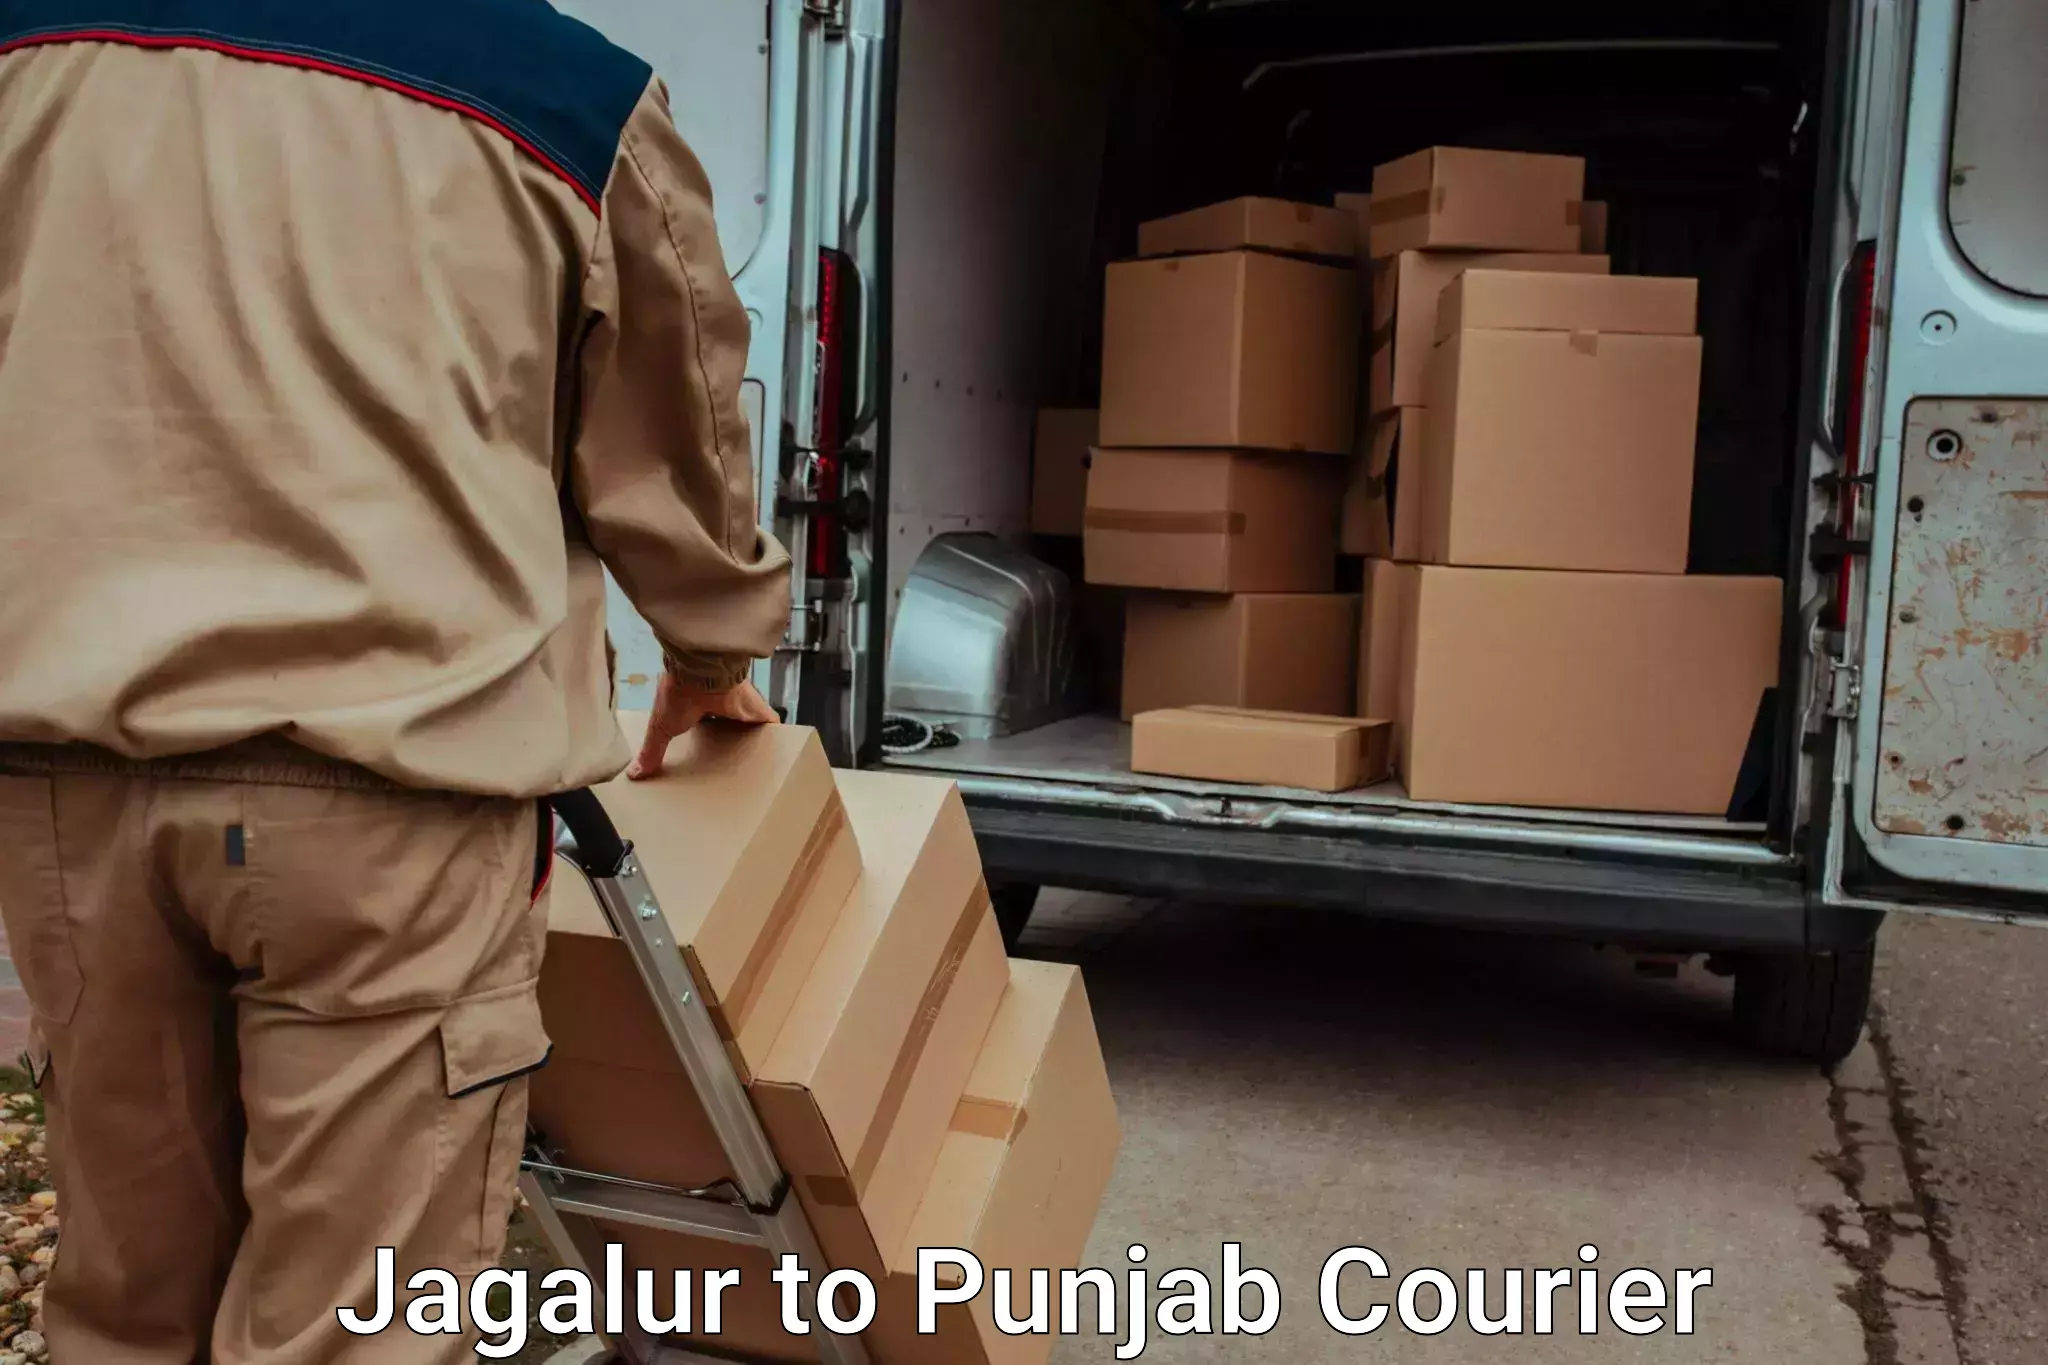 Home relocation experts Jagalur to Punjab